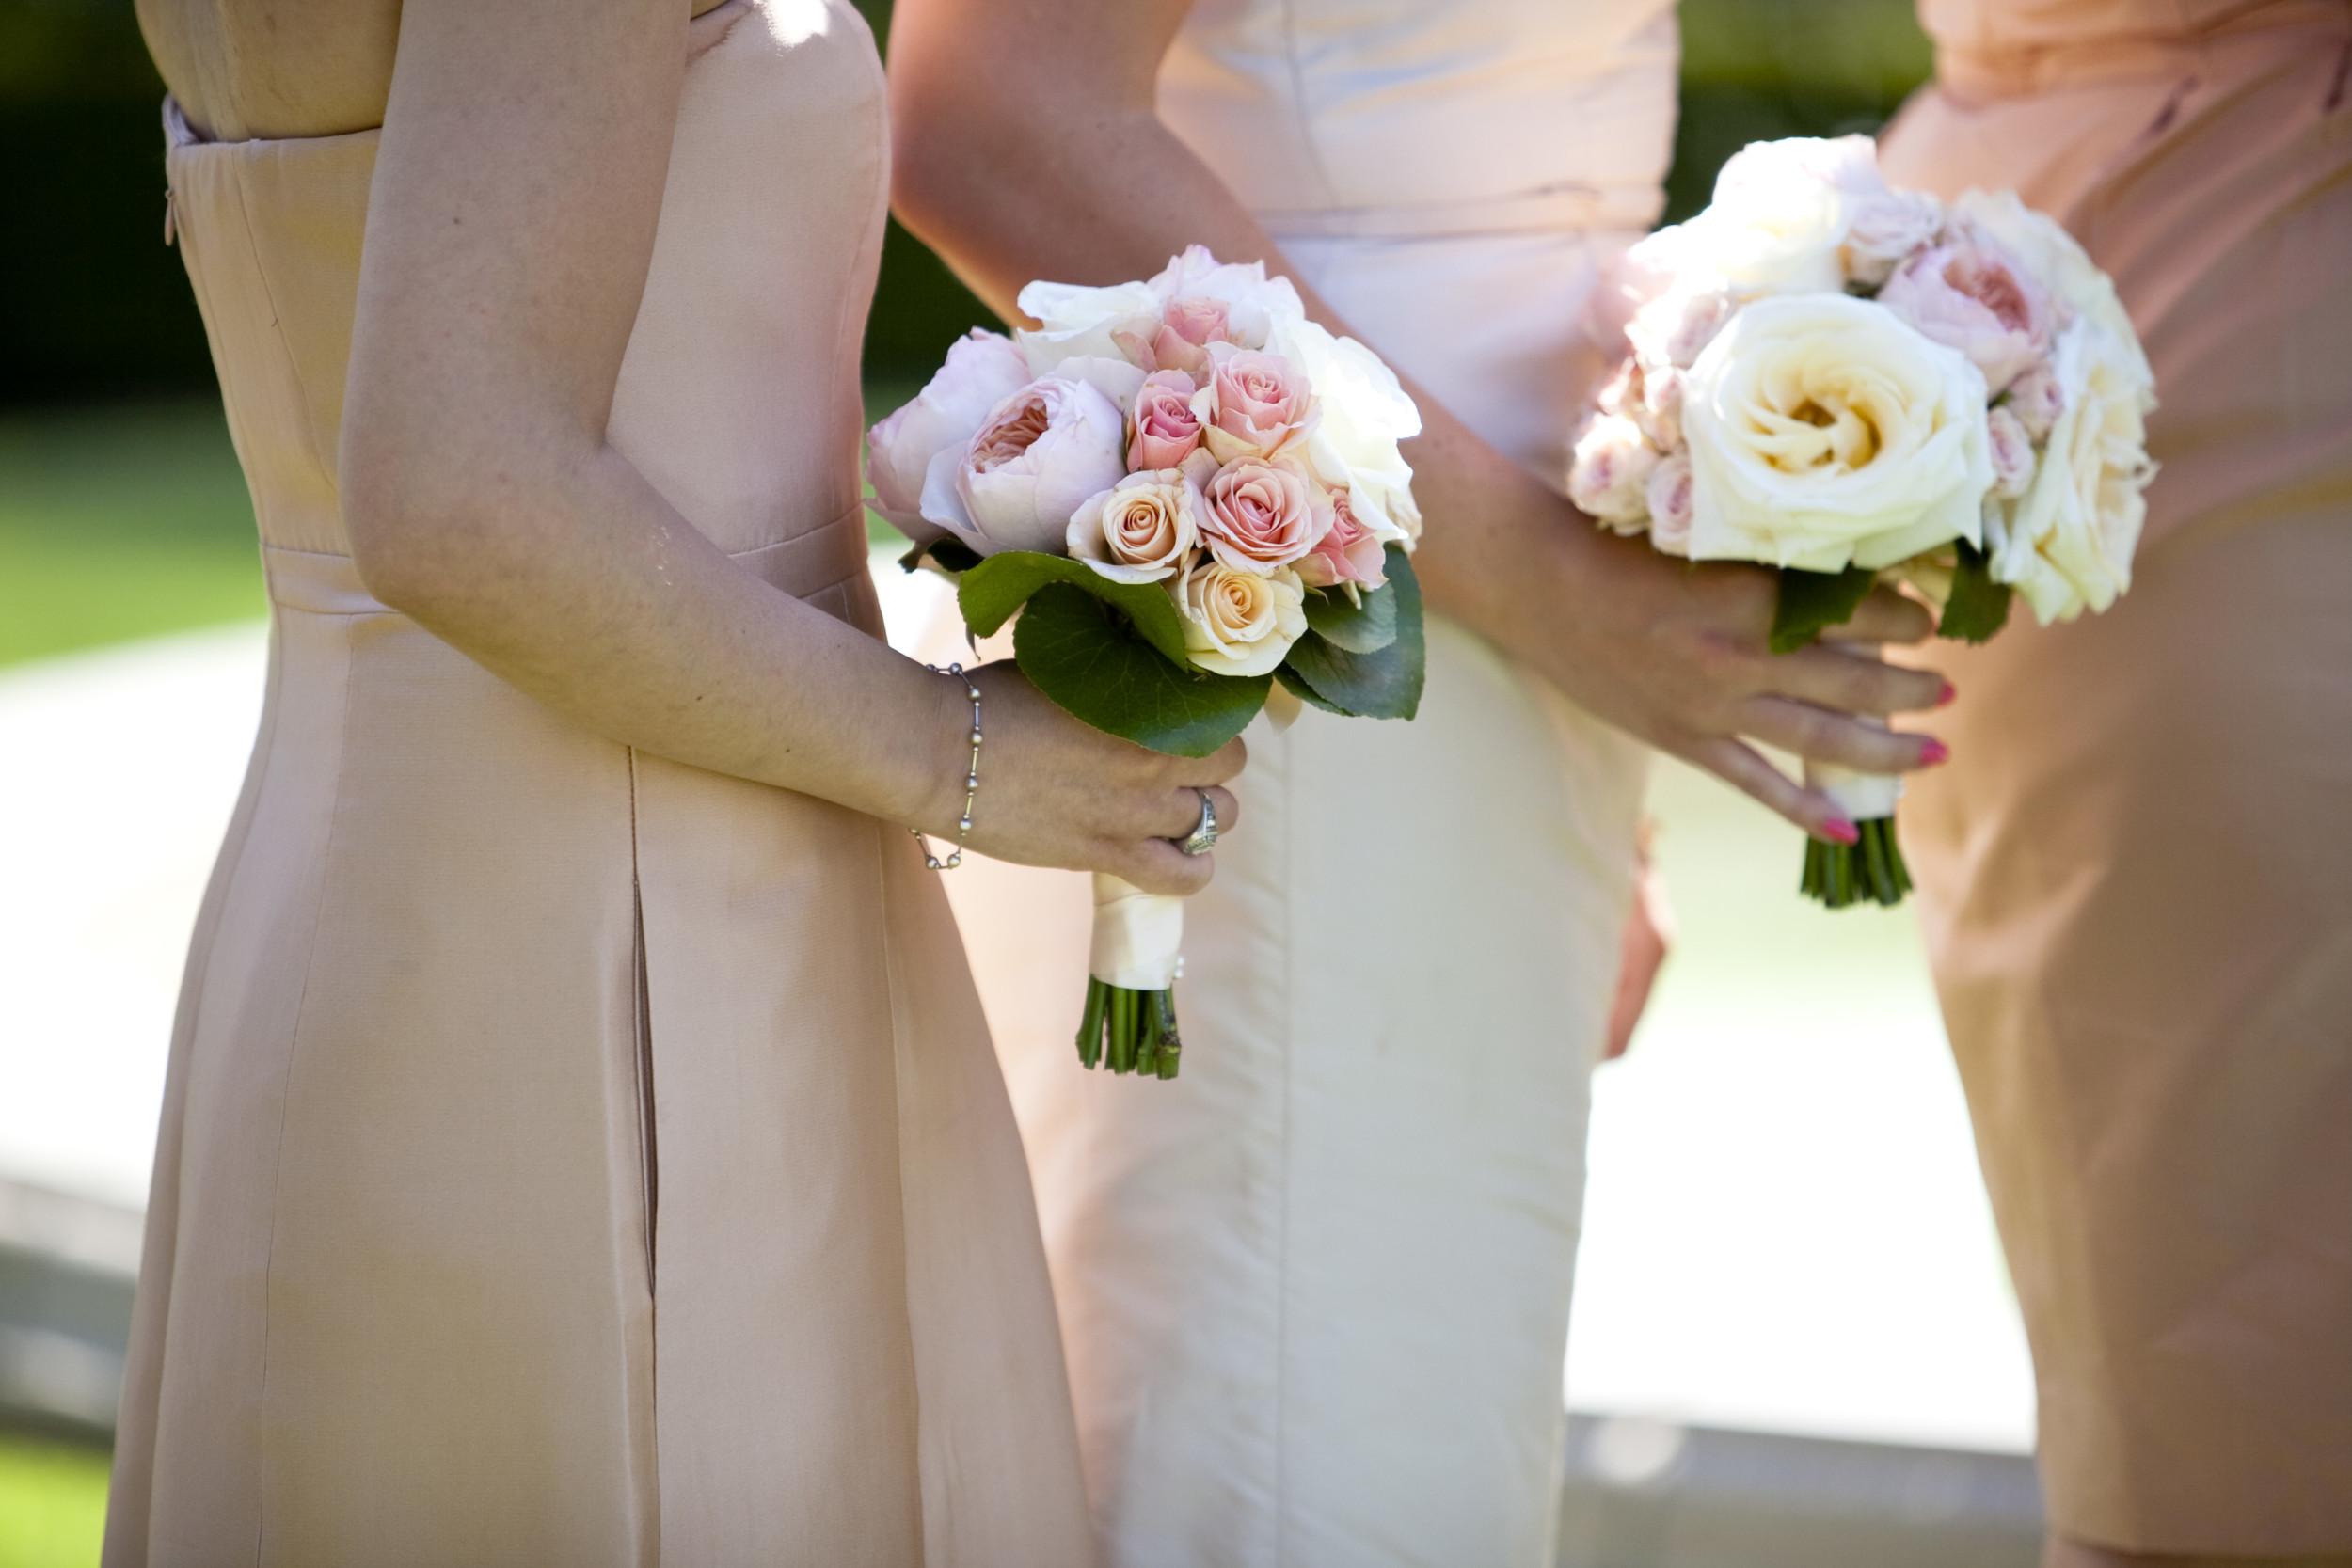 Getting Your Wedding Published